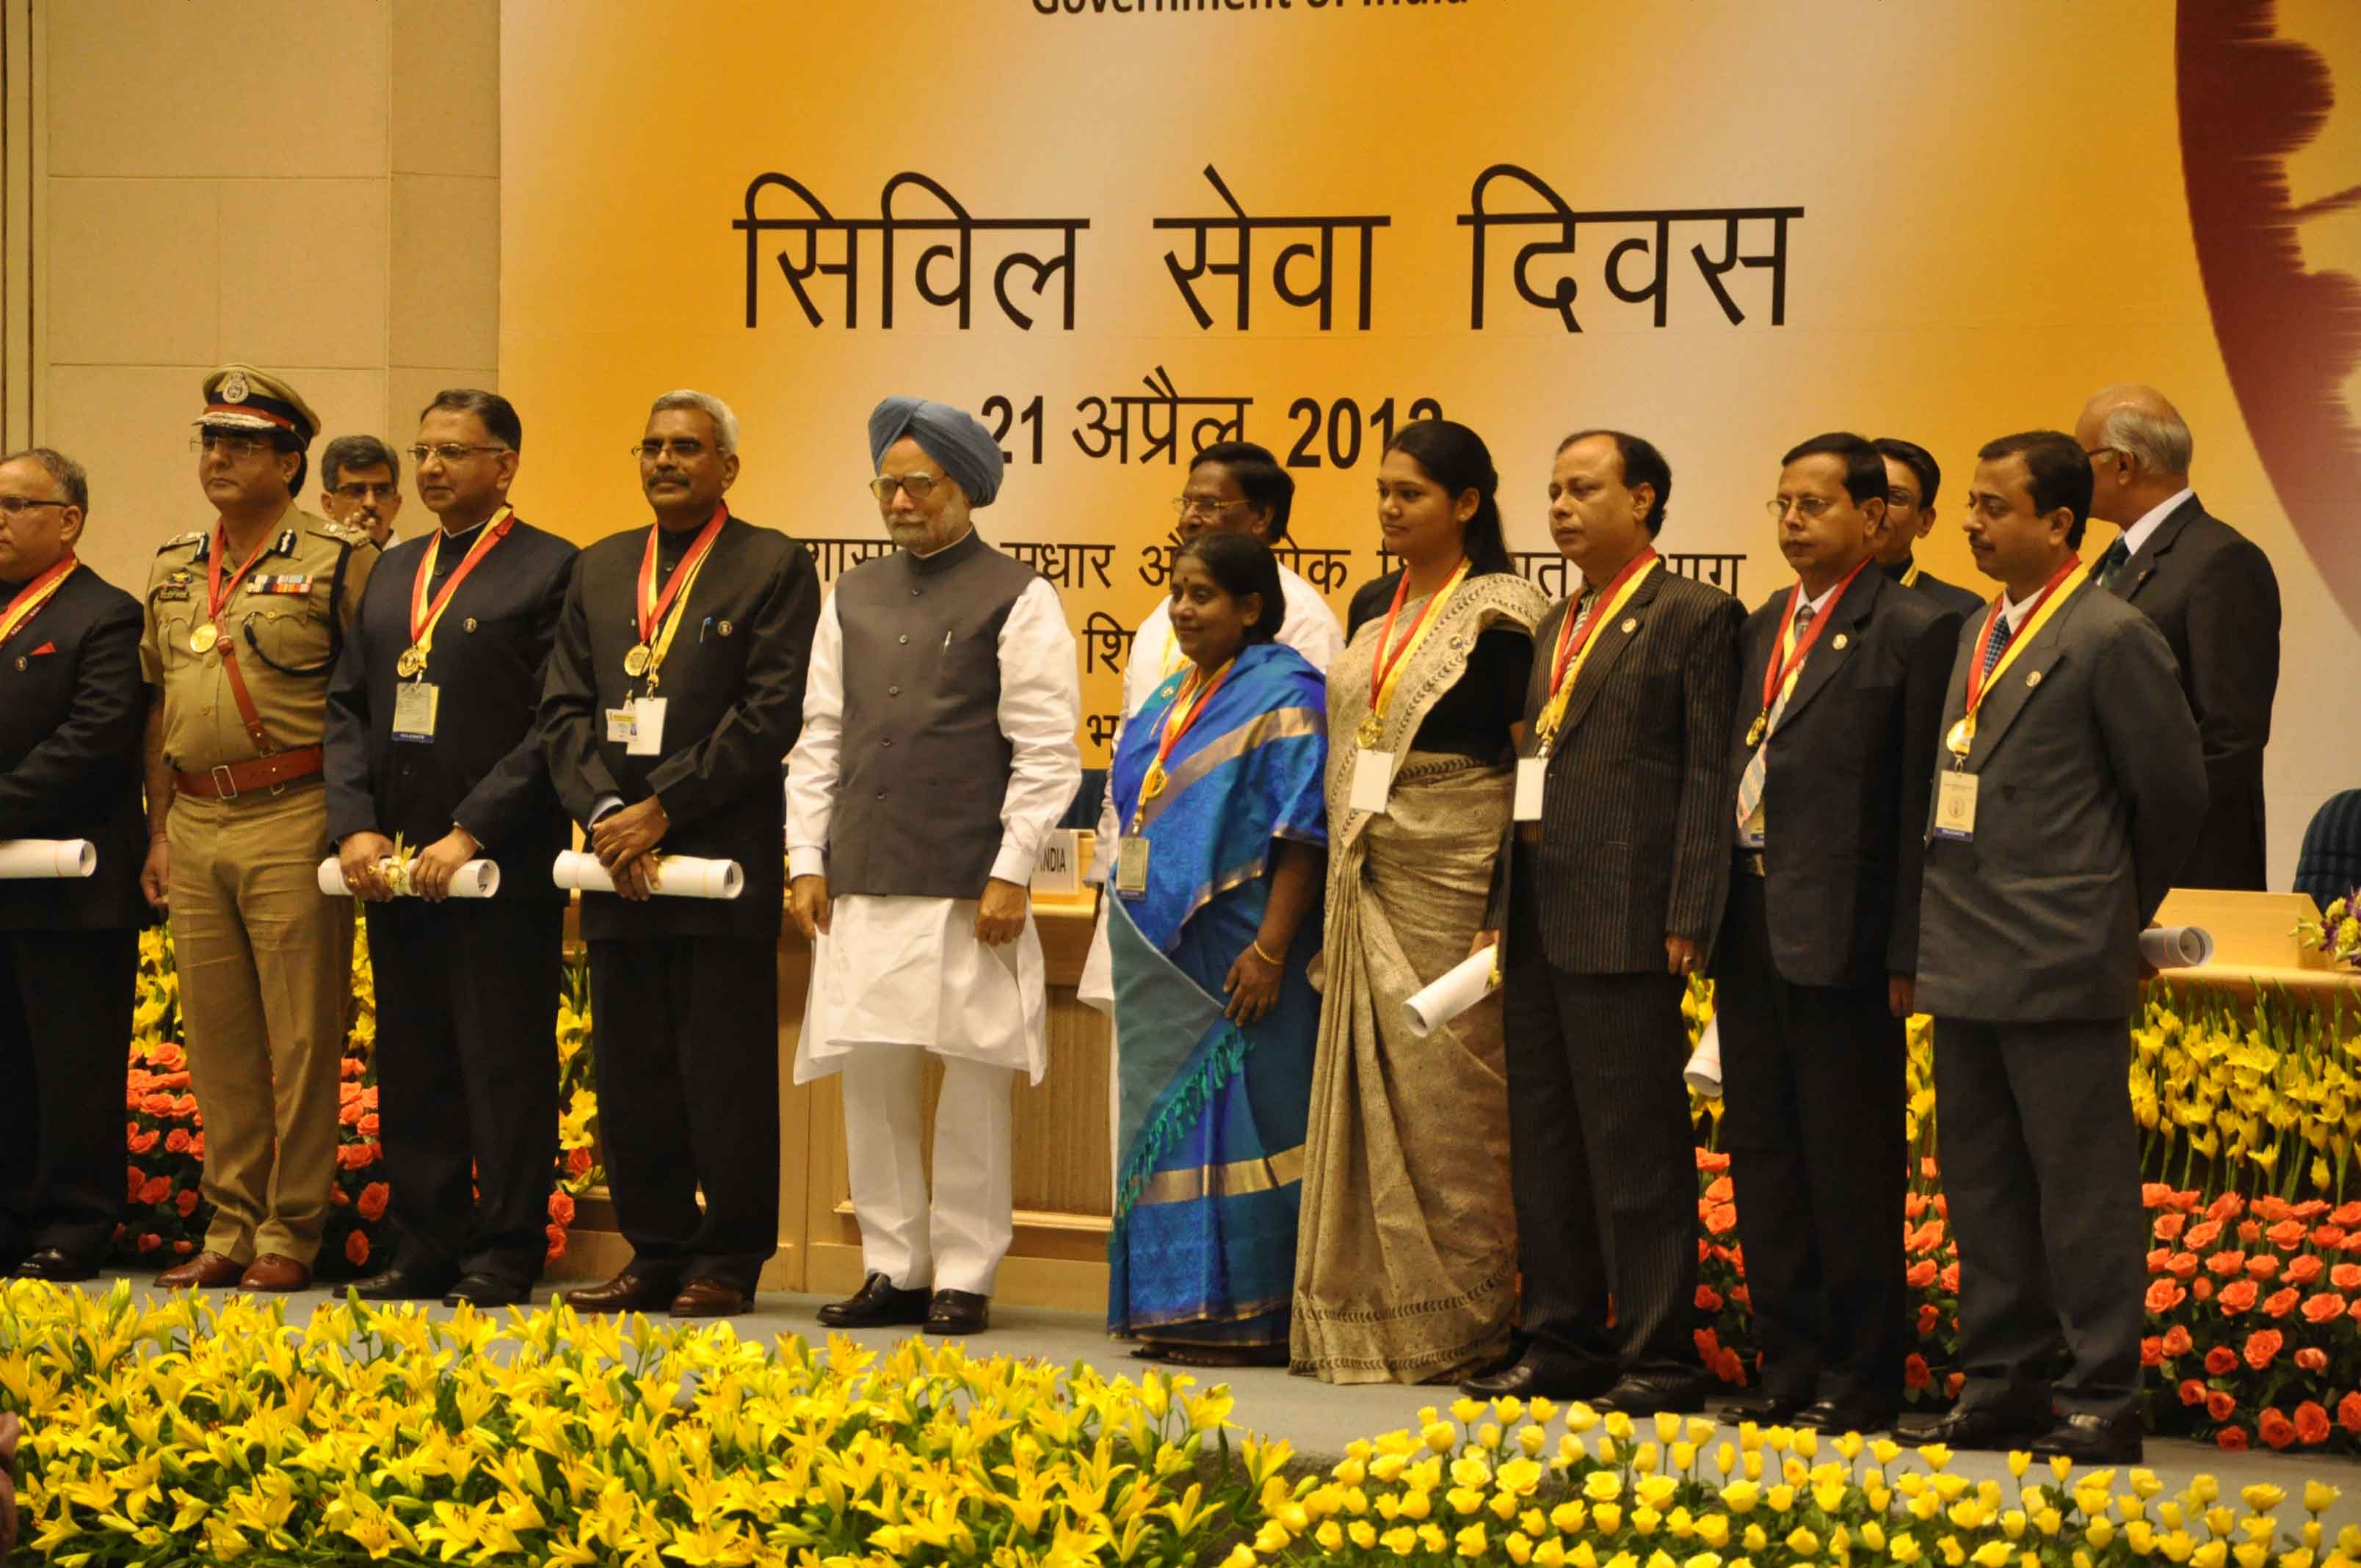 The team from North Tripura with Prime Minister